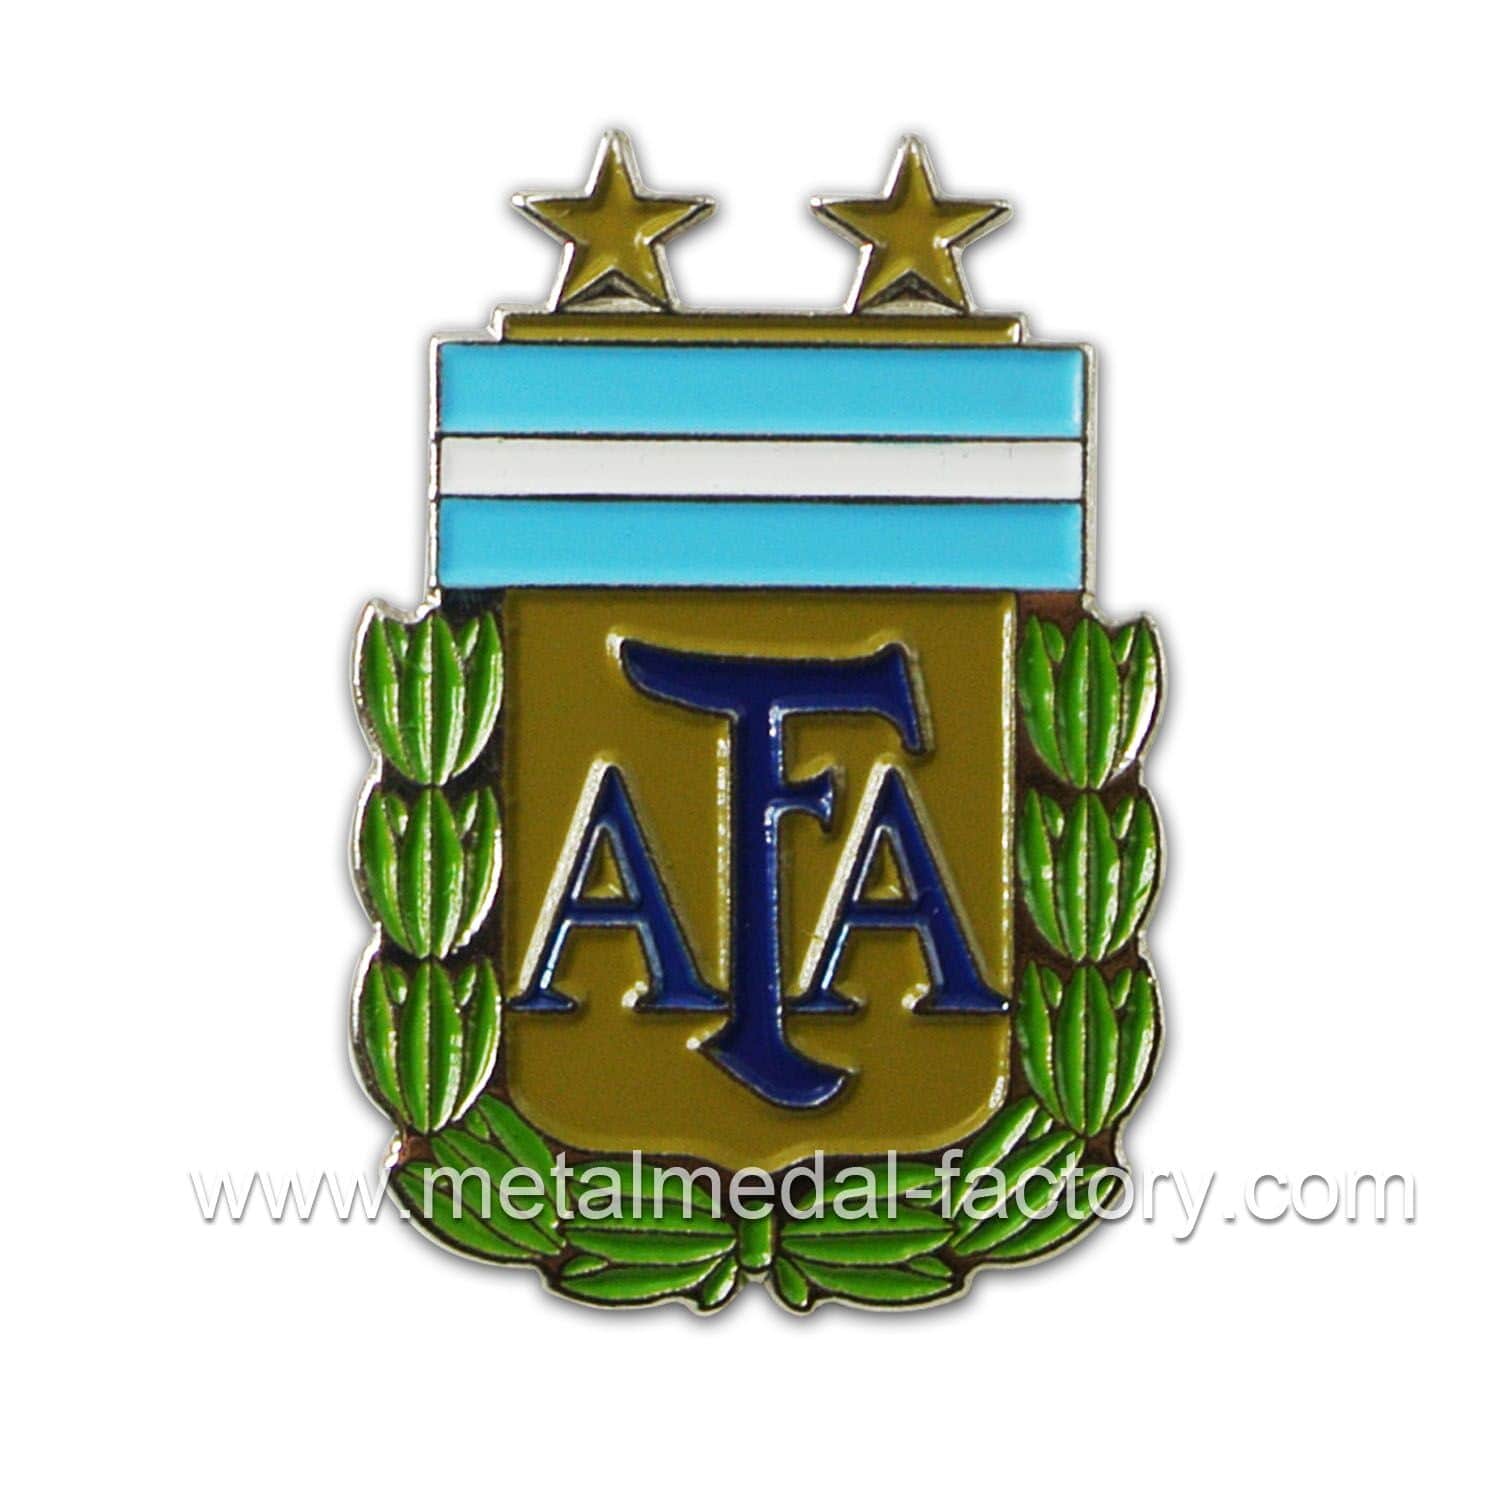 Argentine Football Association is our cooperation